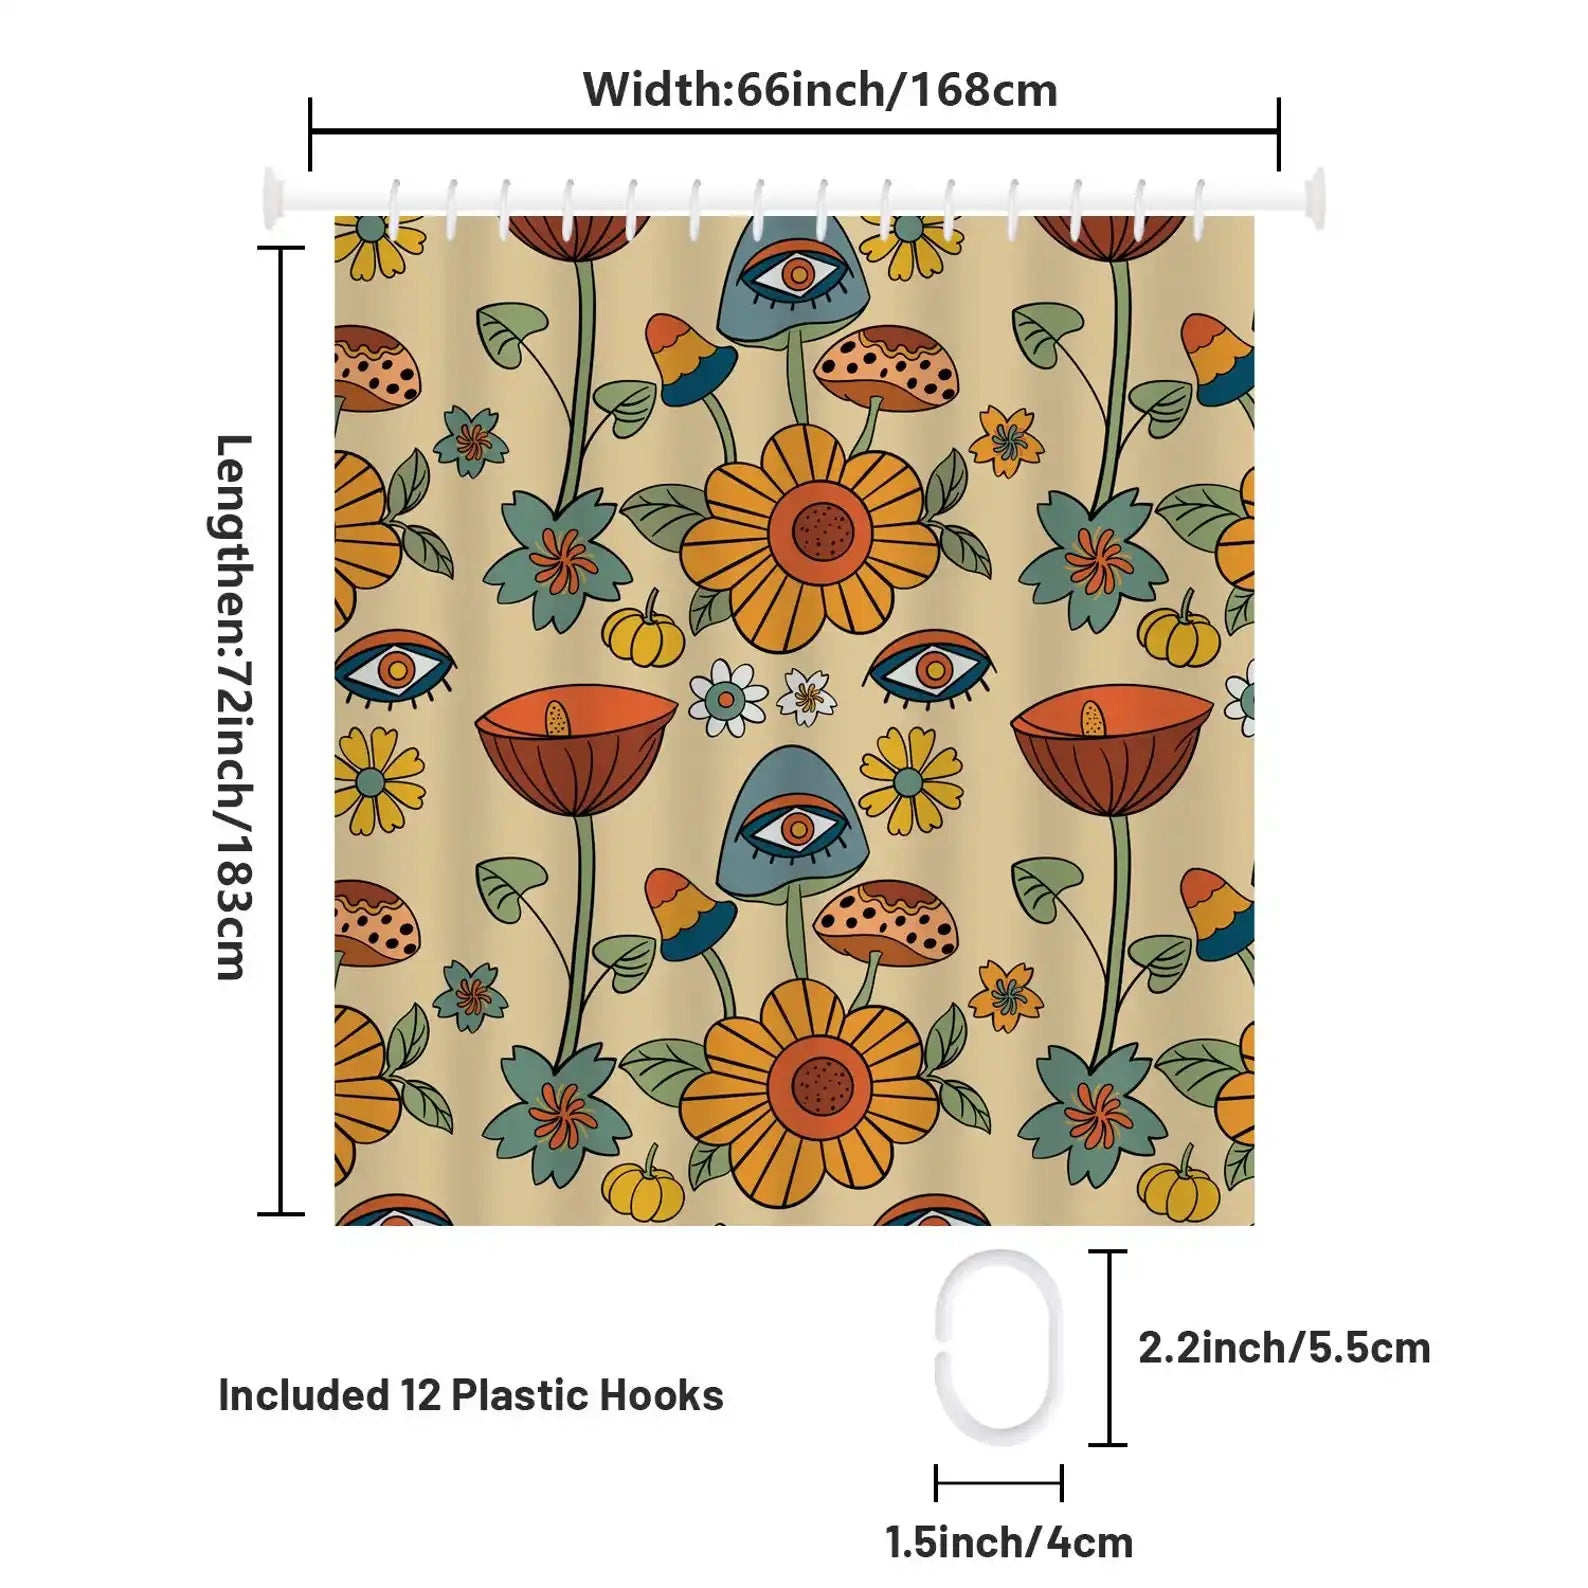 A Mushroom Eye Flowers Shower Curtain by Cotton Cat, featuring an intricate flower pattern, perfect for adding a touch of elegance to your bathroom decor.